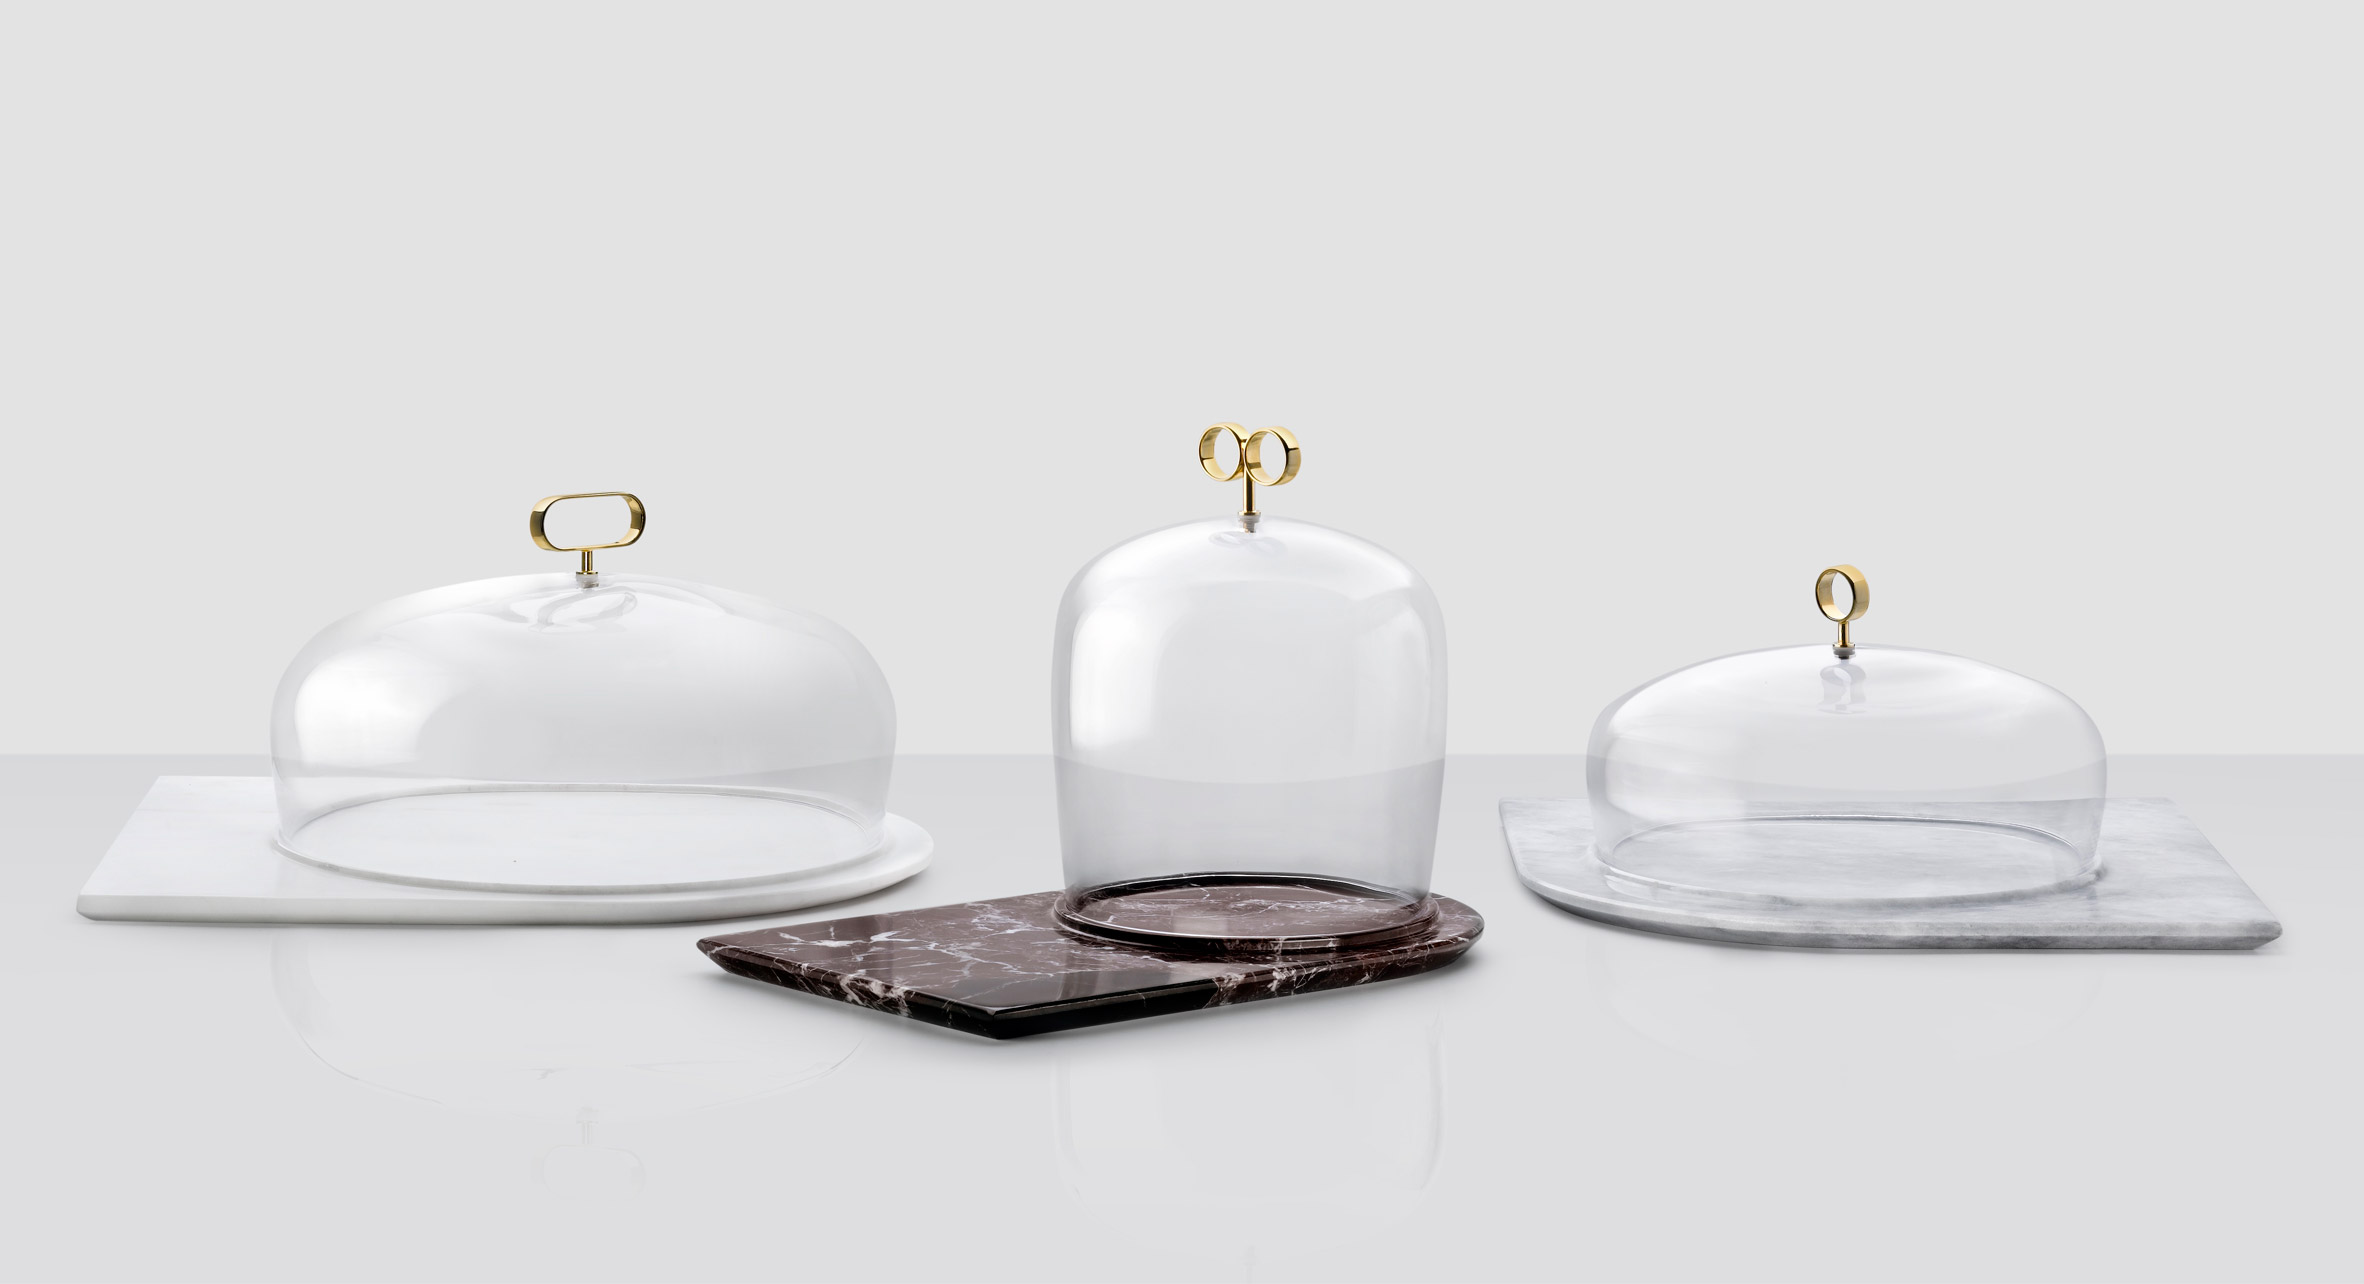 Nude to present new glassware collections at London Design Festival